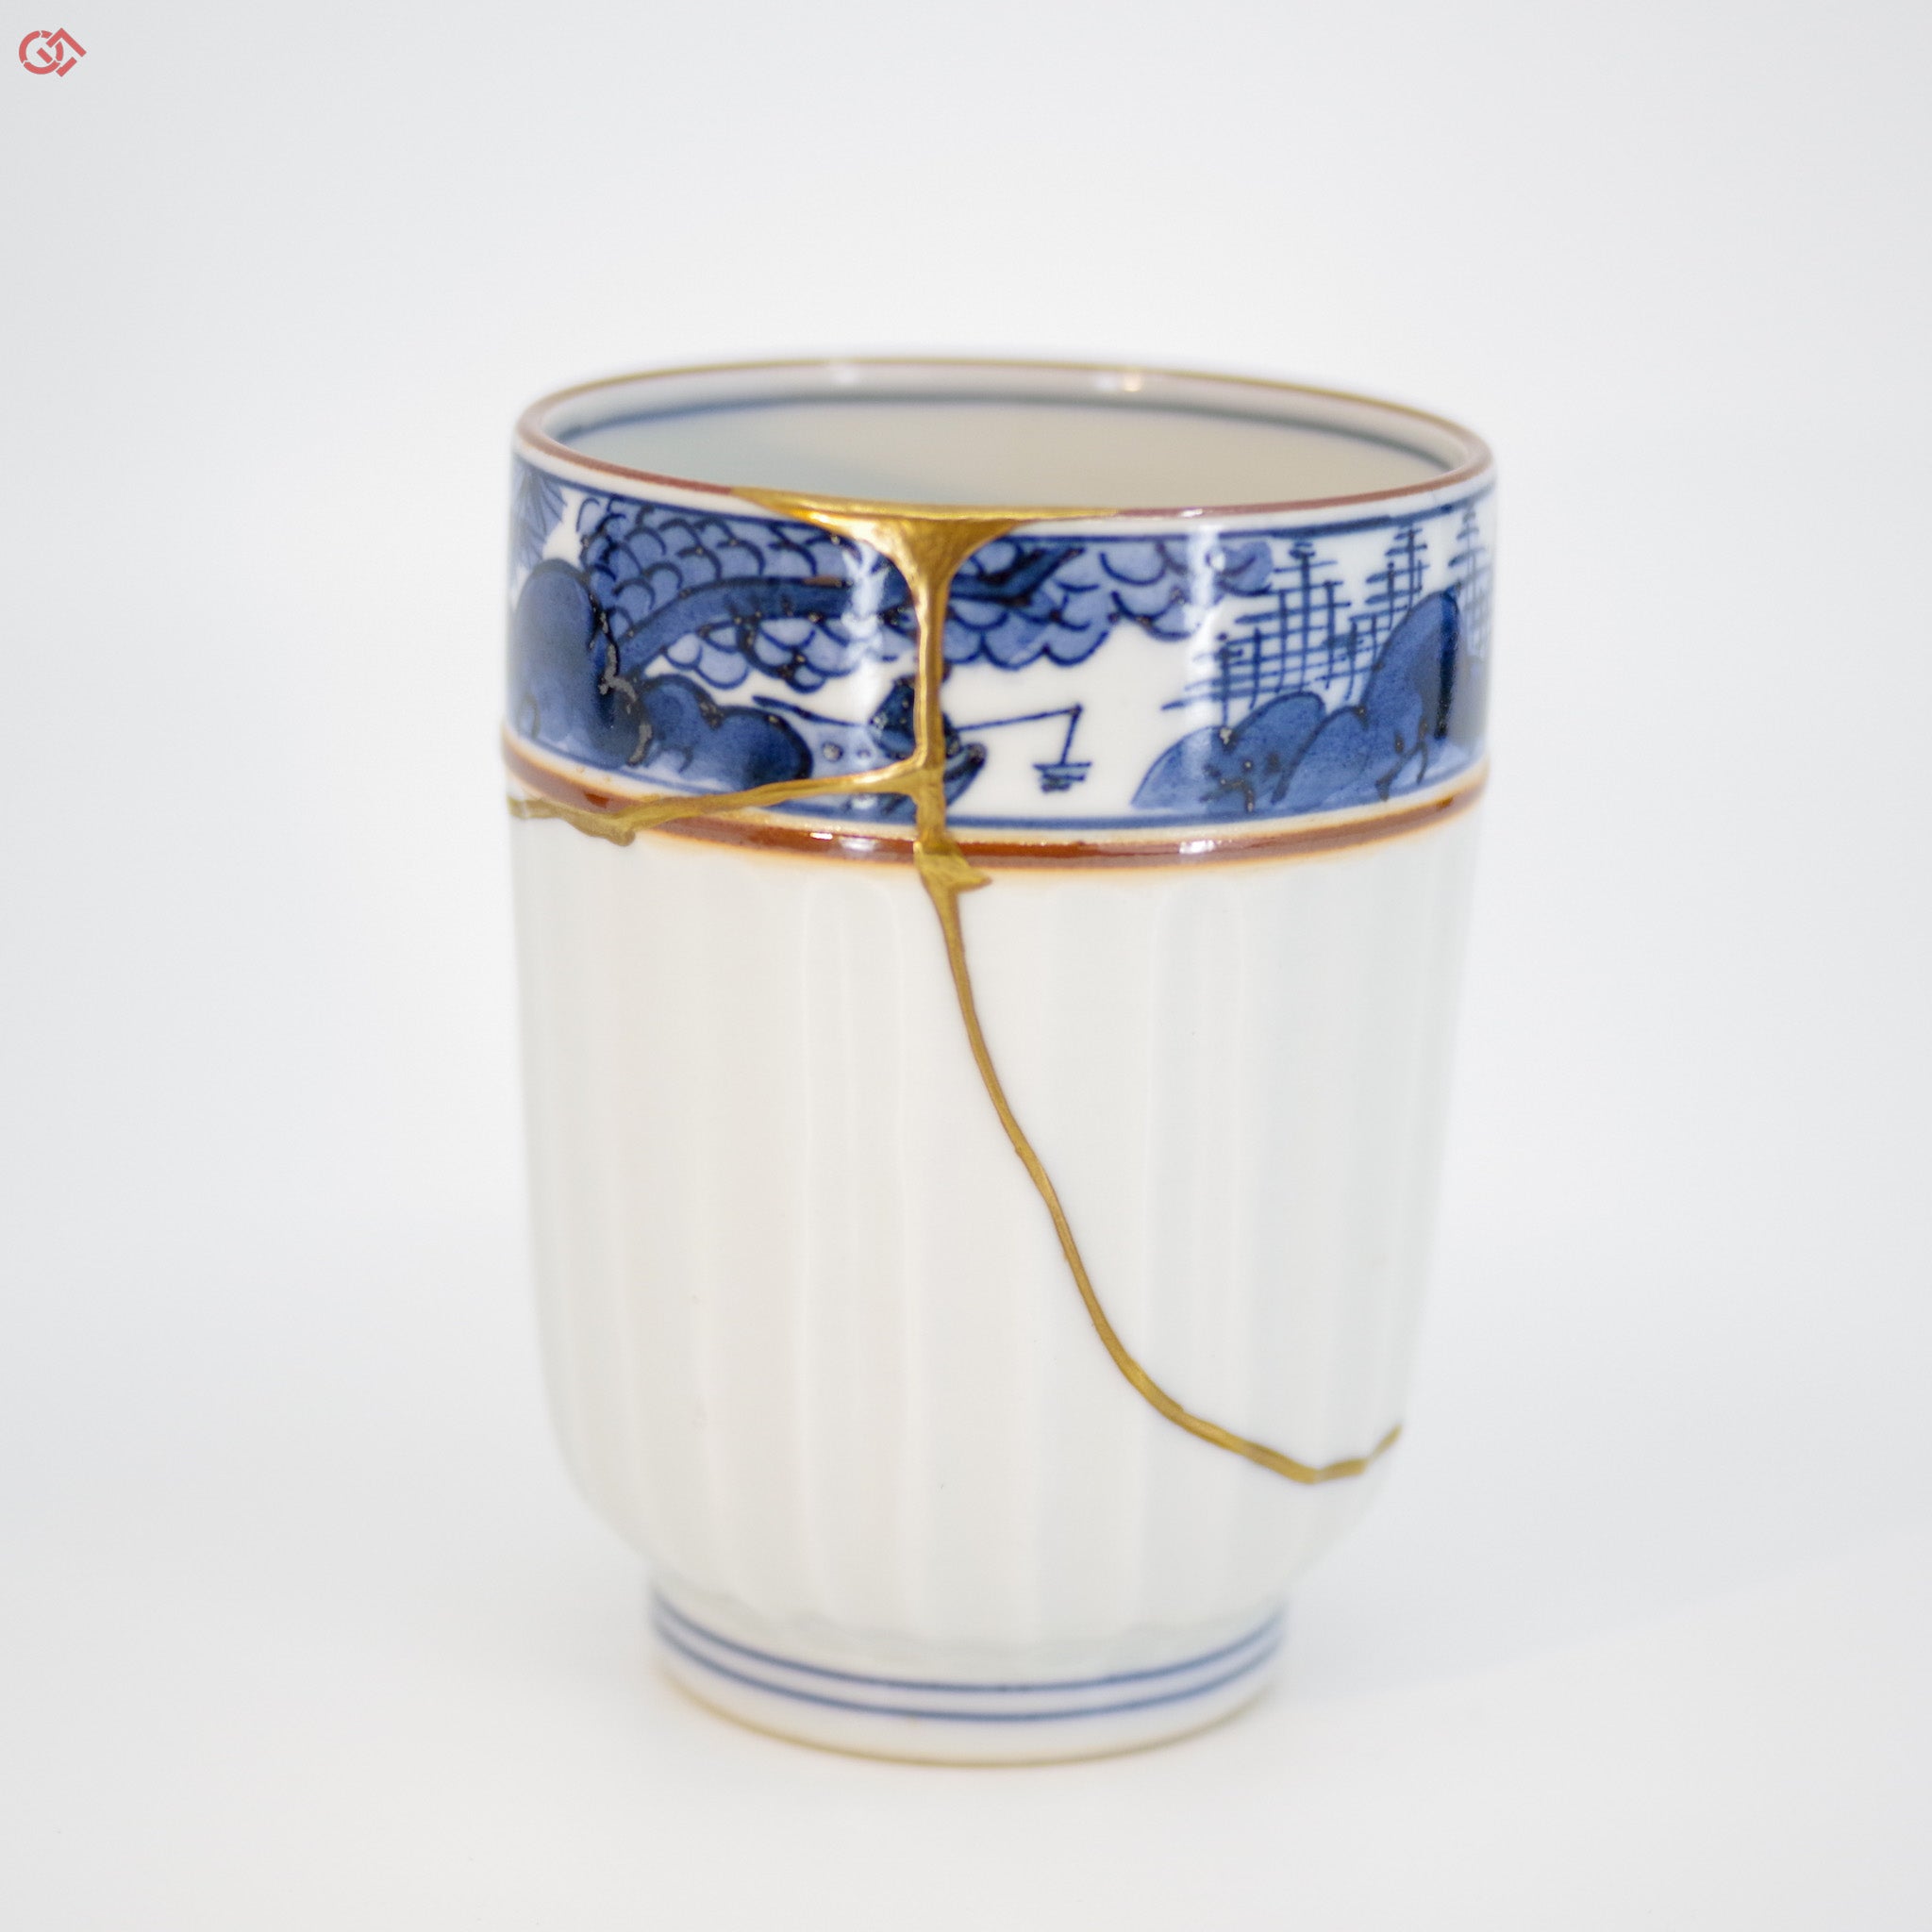 Enlarged view of authentic Kintsugi art